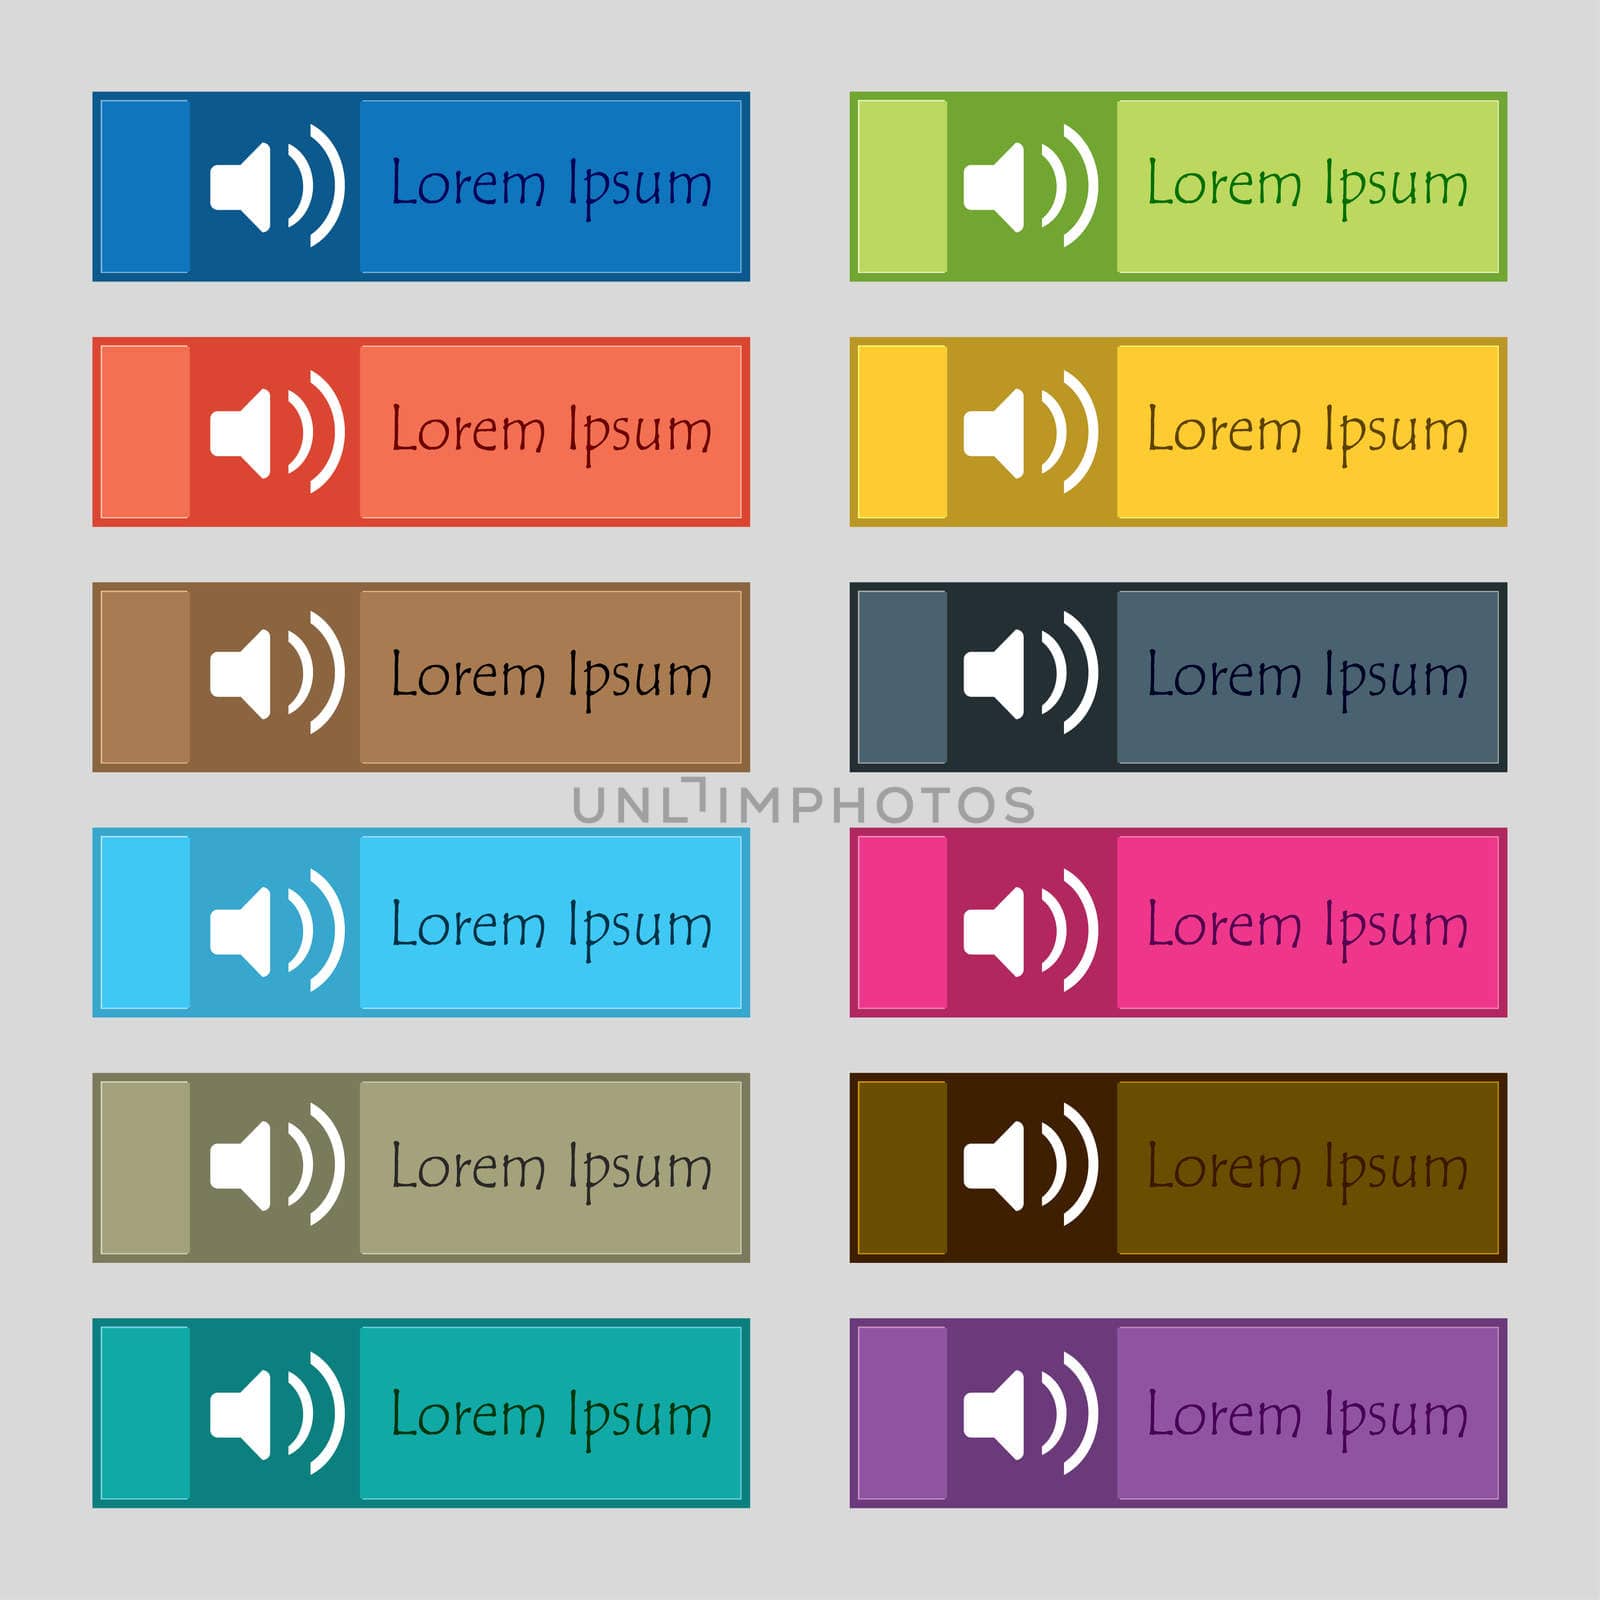 Speaker volume, Sound icon sign. Set of twelve rectangular, colorful, beautiful, high-quality buttons for the site. illustration